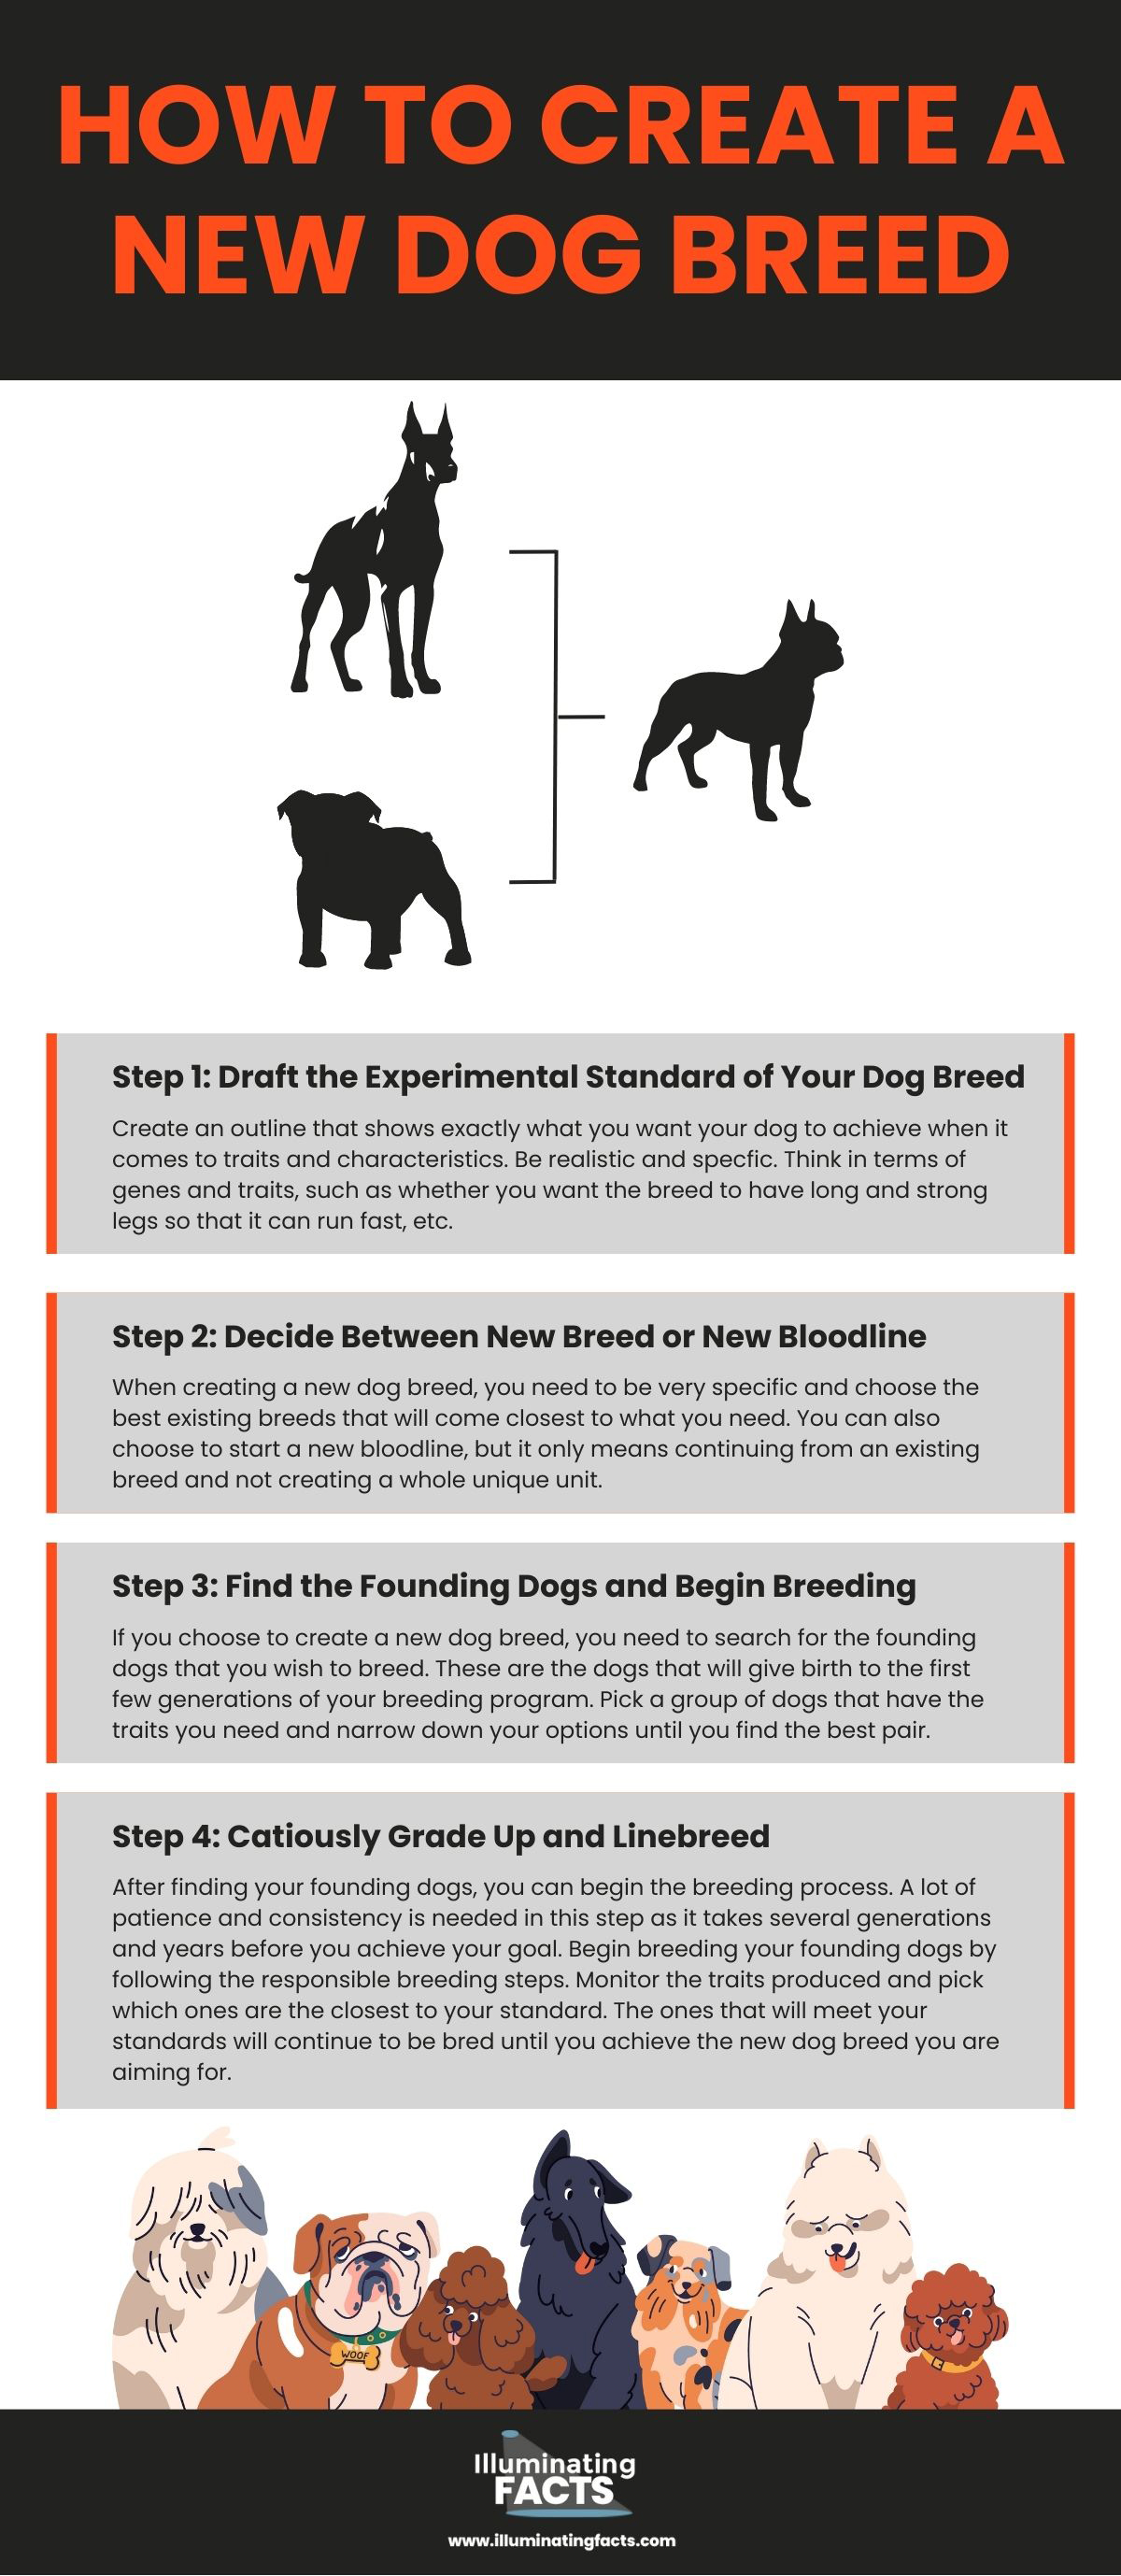 How to Create a New Dog Breed